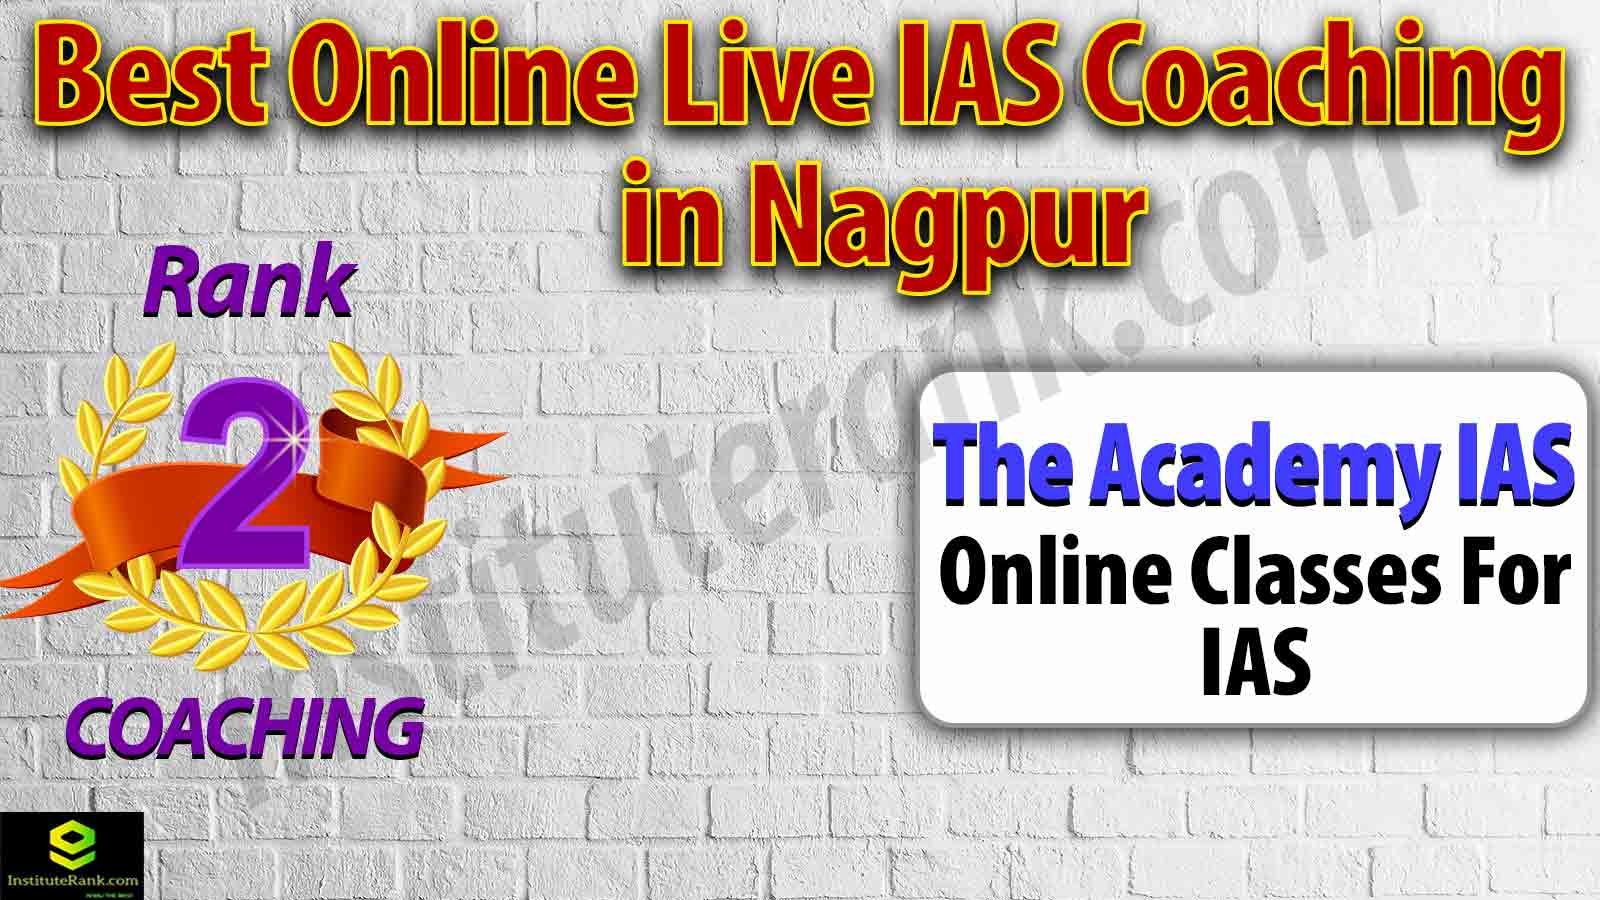 Best Online live Civil Services Coaching in Nagpur